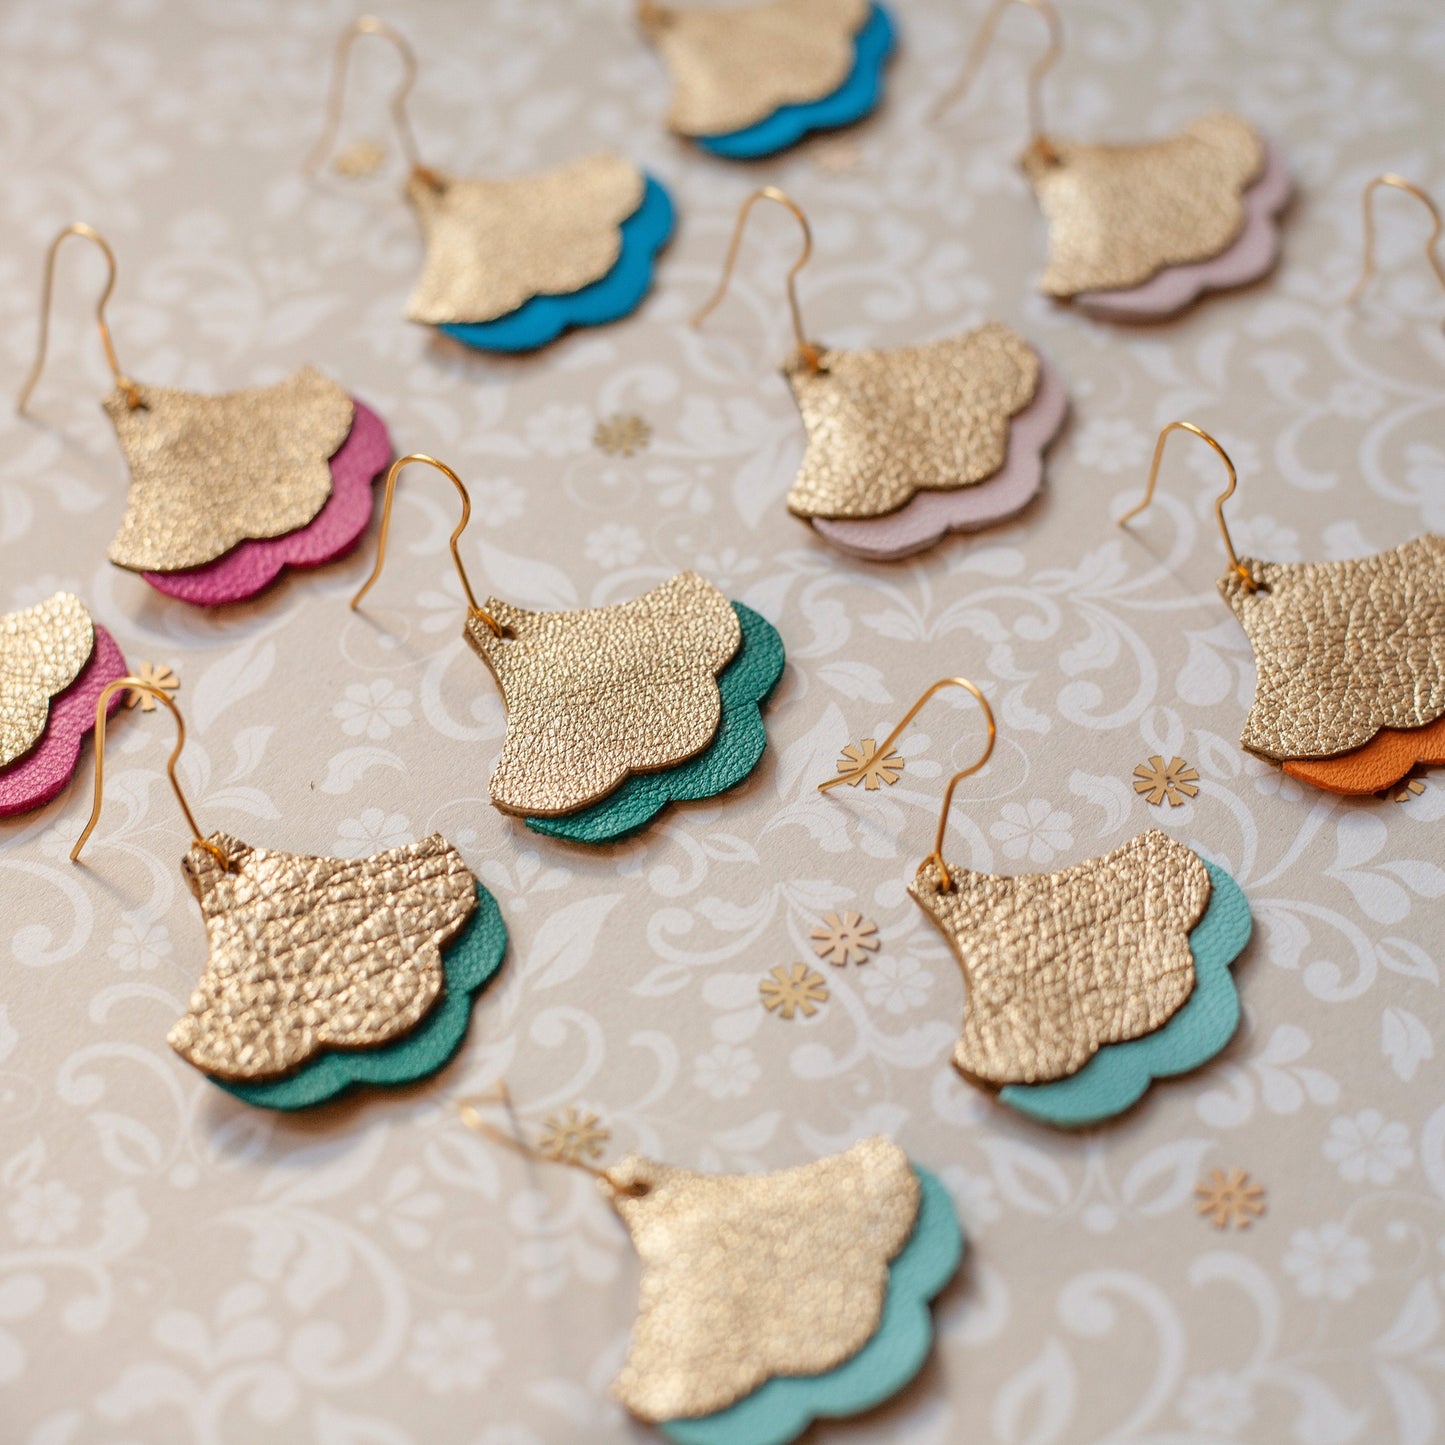 Ginkgo Biloba earrings in sky blue and gold leather